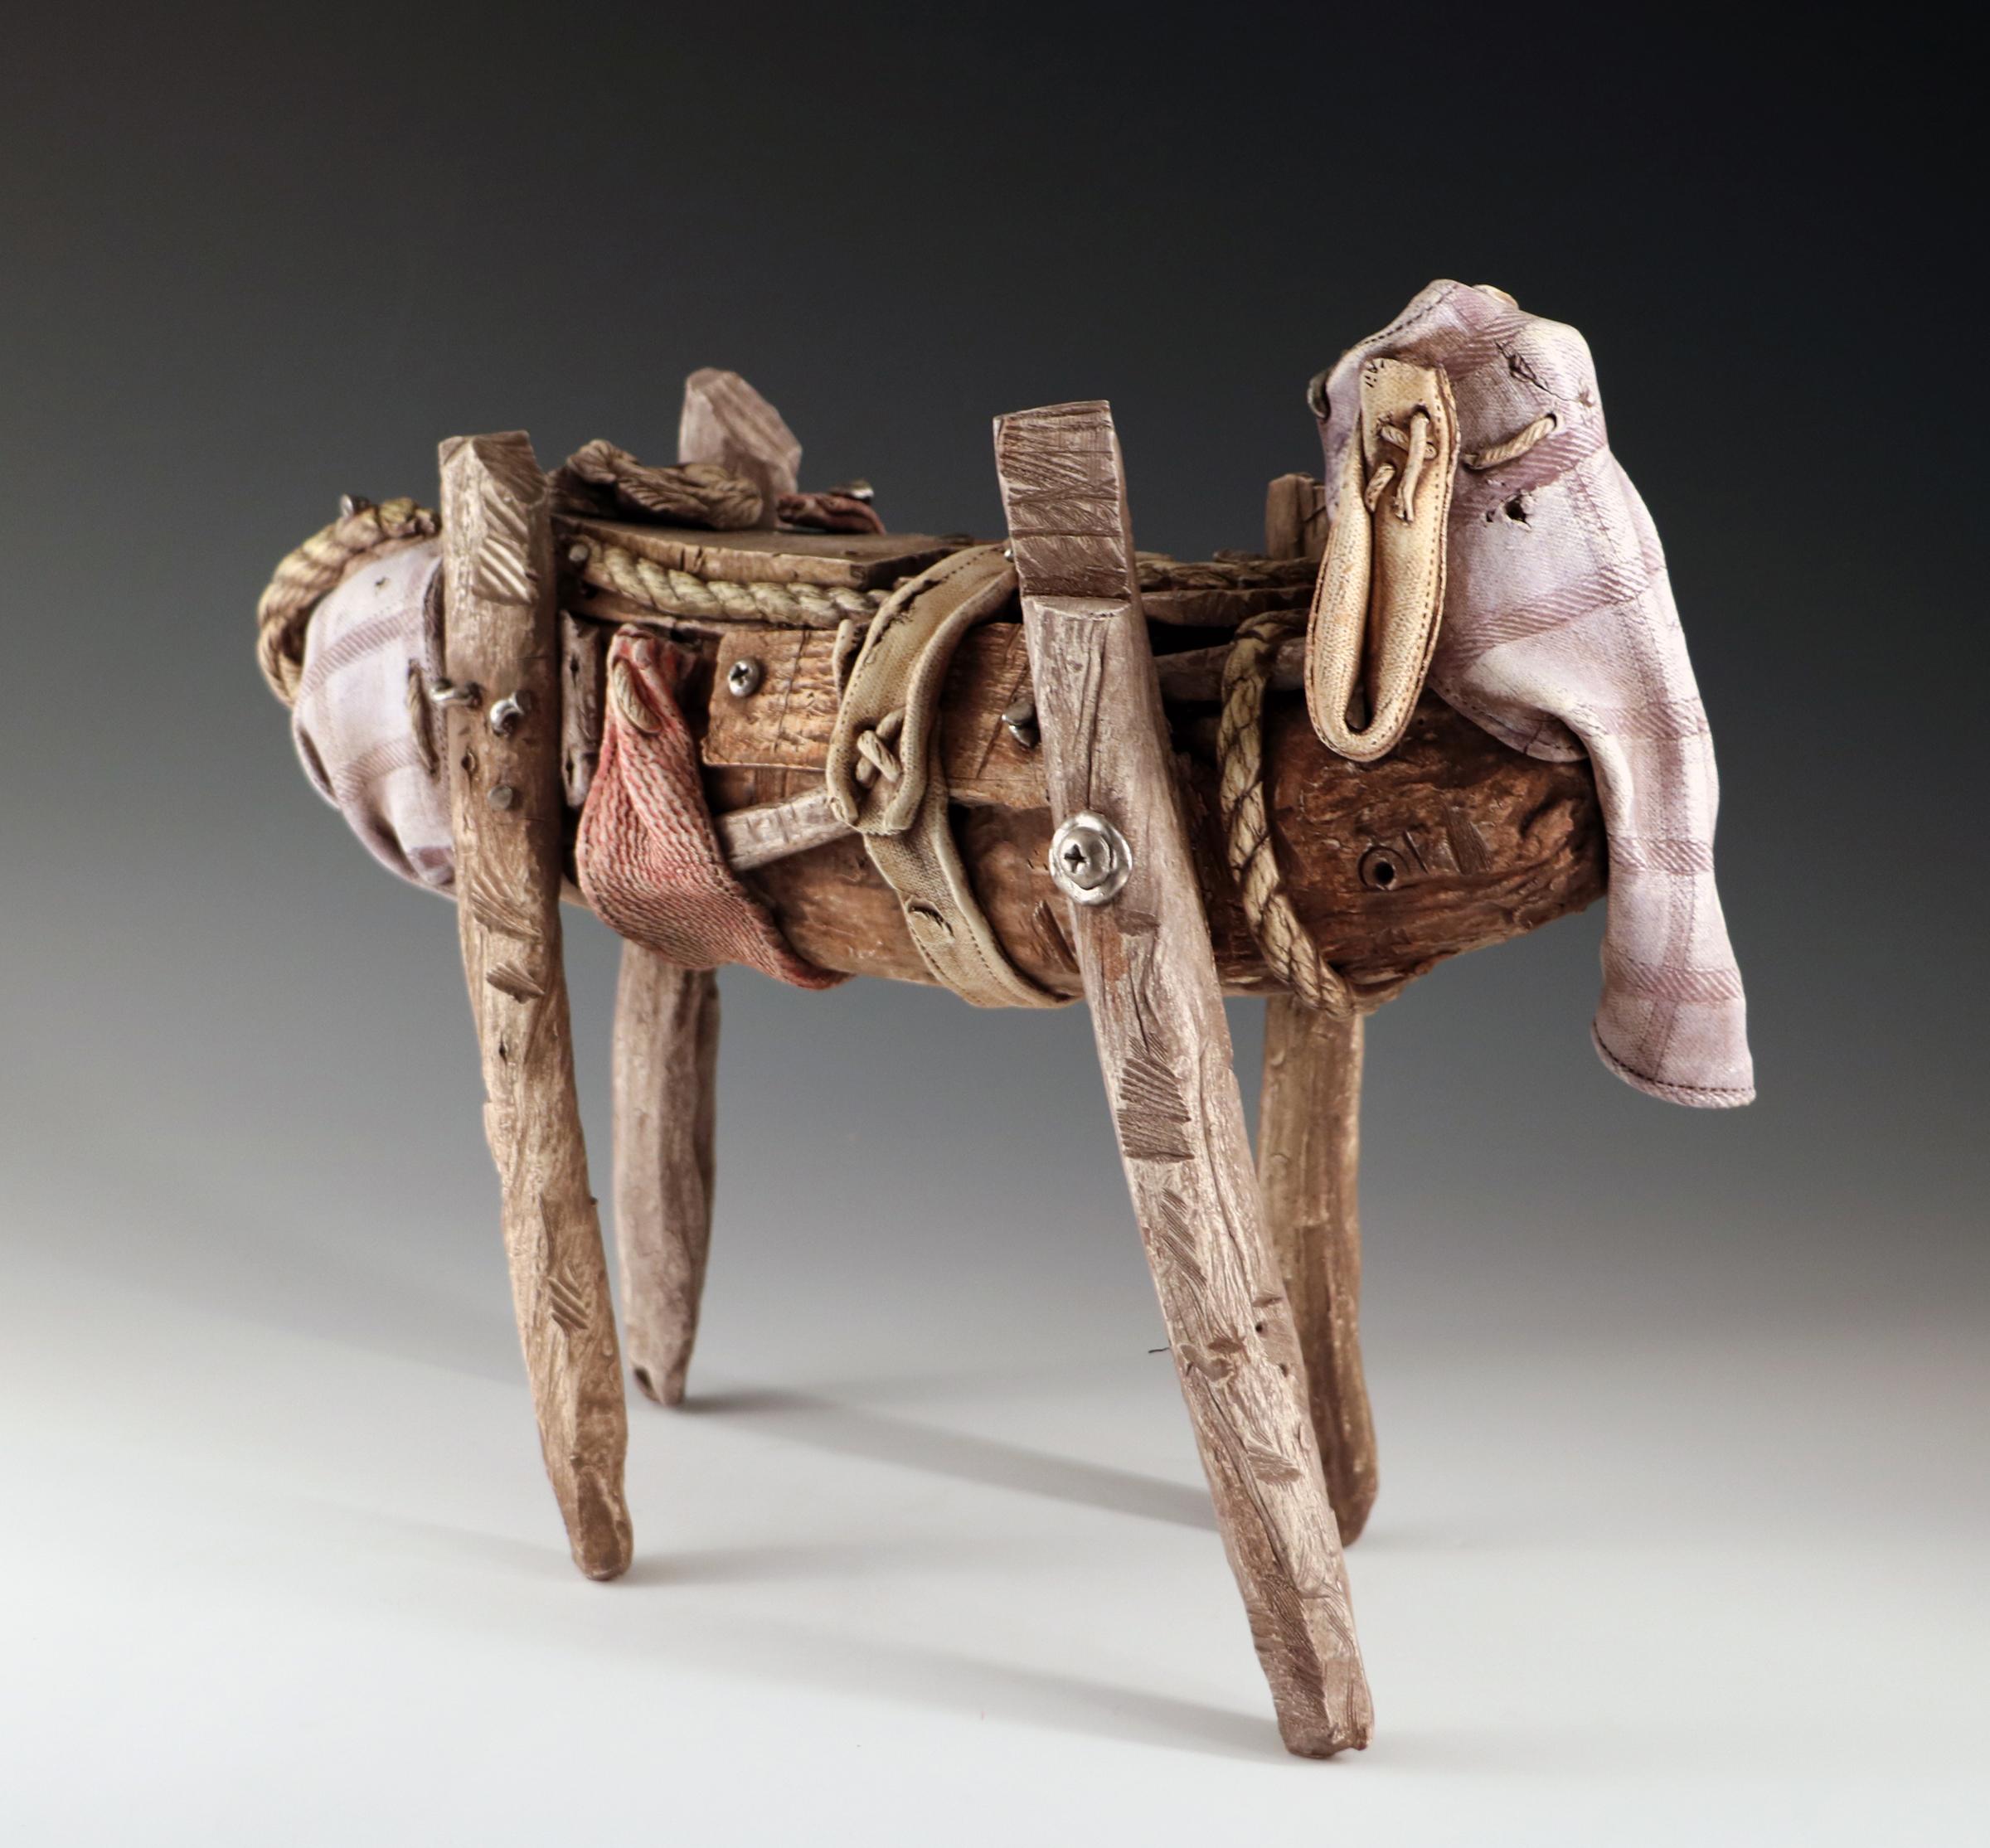 GRACIE - trompe l'oeil ceramic elephant sculpture that looks like outsider art - Sculpture by Keith Schneider